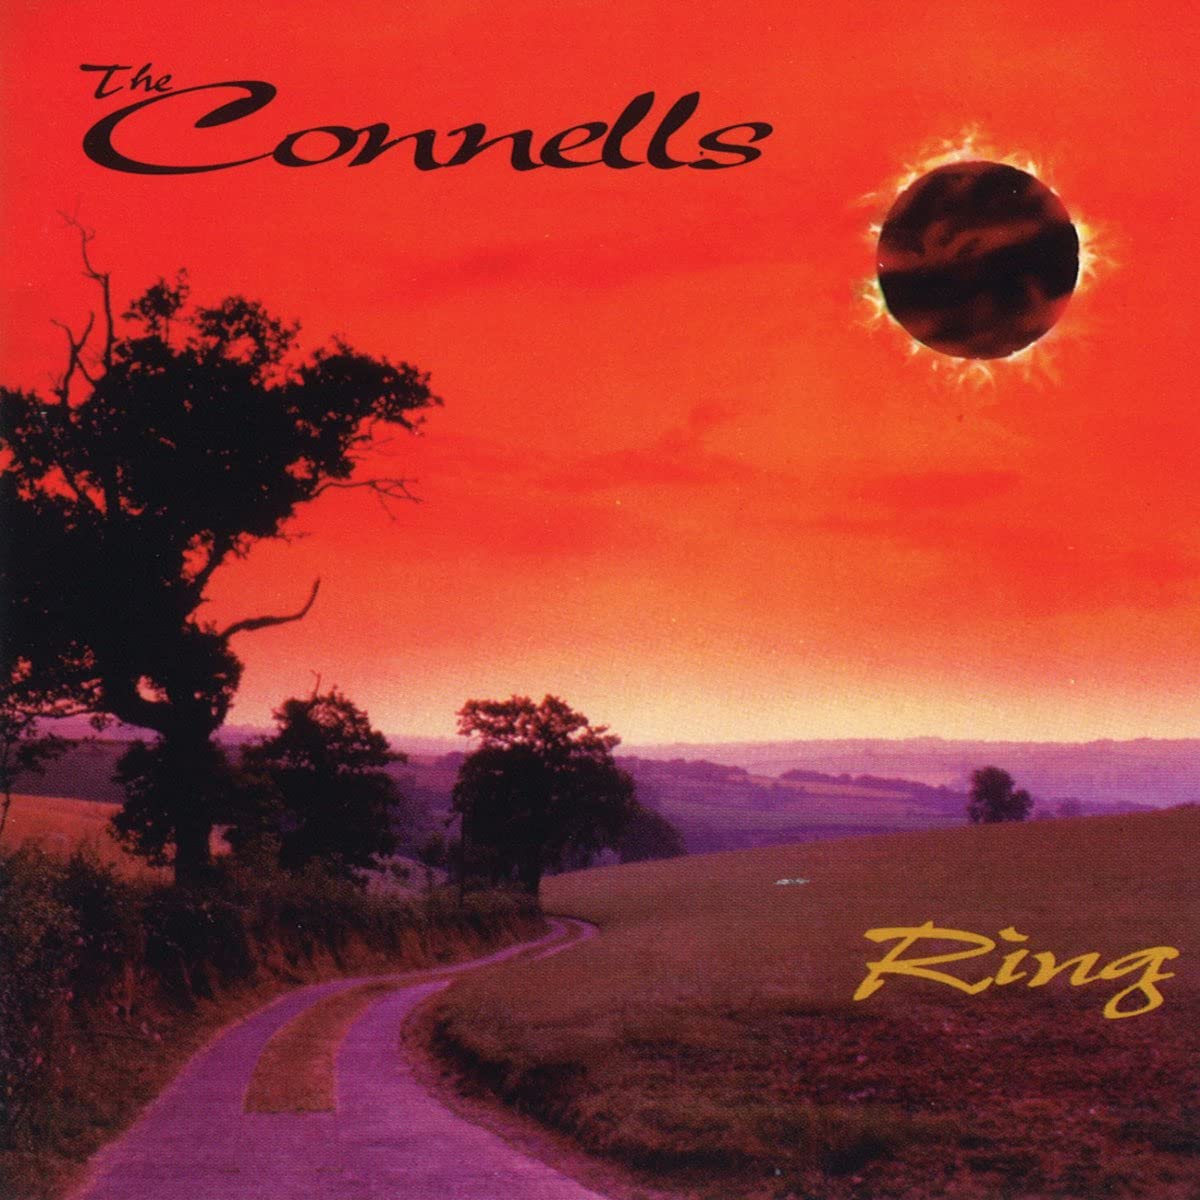 THE CONNELLS - RING - 30TH ANNIVERSARY EDITION - VINYL LP